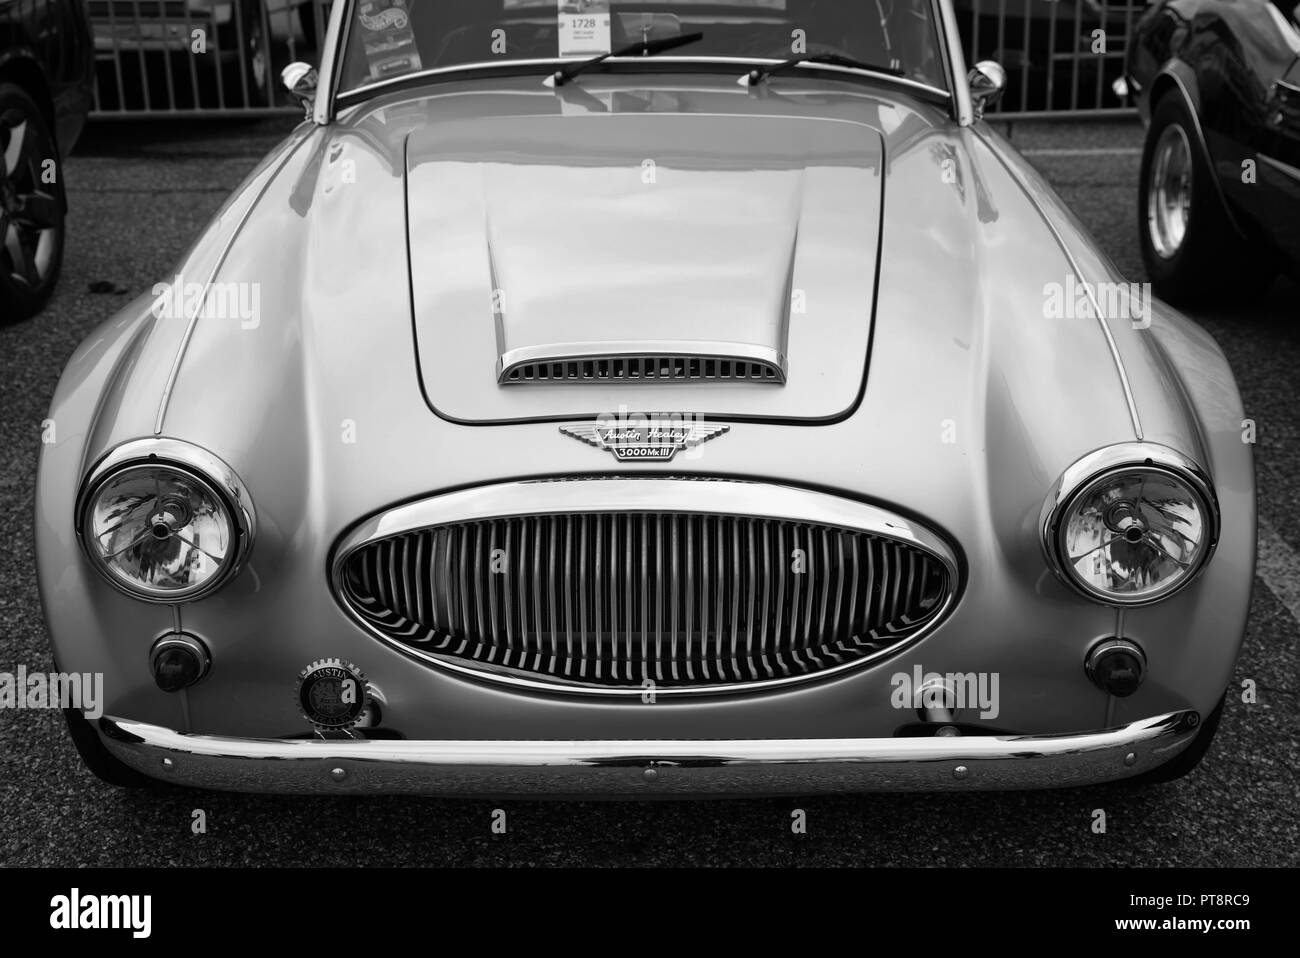 Silver Austin Healey 3000 Mk3 on display at the Ocean City Convention Center, Ocean City, Maryland, USA. Stock Photo